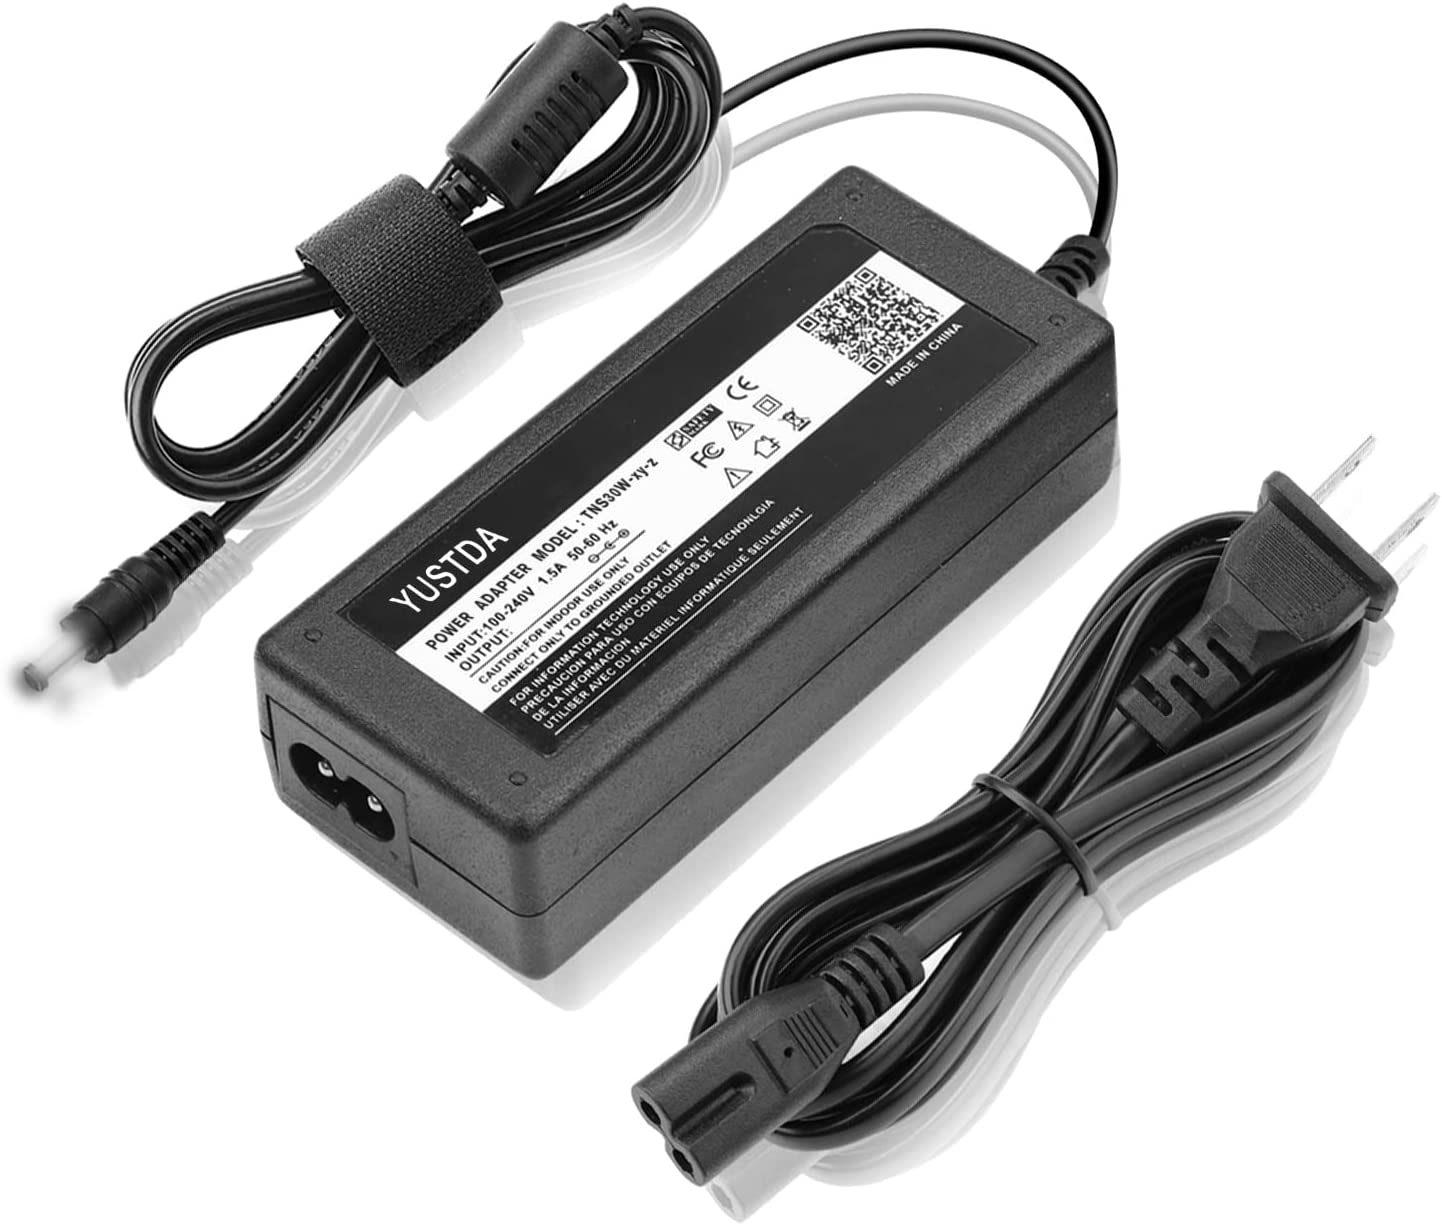 Yustda 19V AC/DC Adapter Replacement for Westinghouse UW46T7HW UW48T7HW TW-70411-U040B 1080p LD-4258 VR-3250DF VR-3225 LD-4080 LD-4695 Power Supply Cord Cable PS Wall Home Battery Charger Mains PSU - image 1 of 5